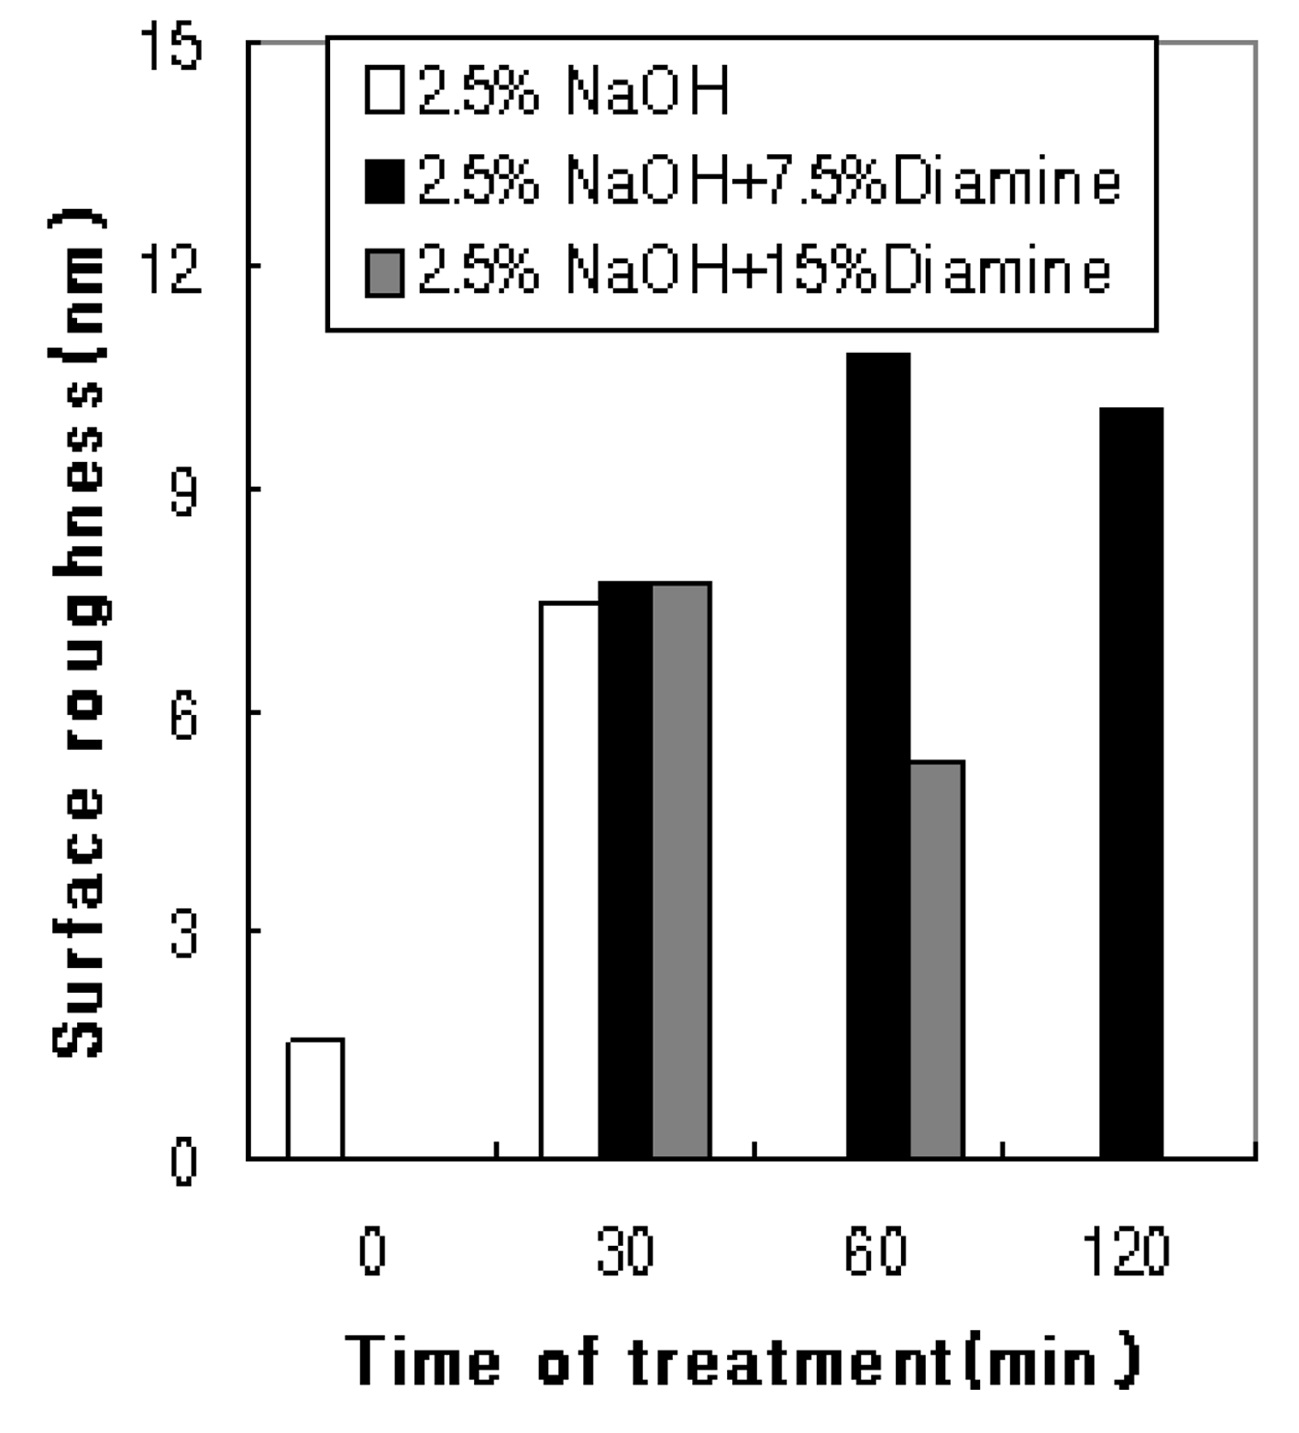 The surface roughness of PET film treated with NaOH or NaOH+ethylene diamine.